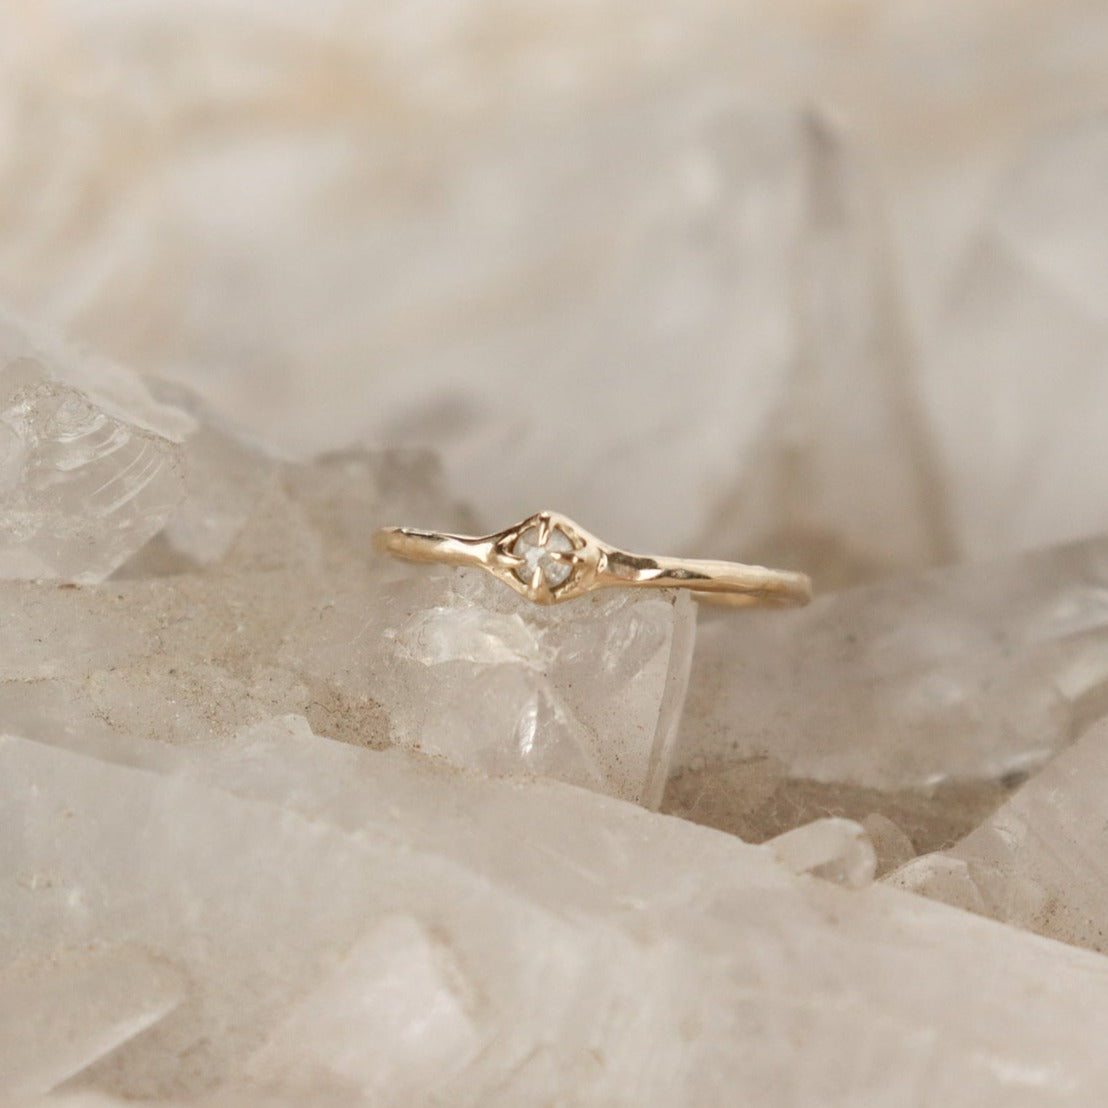 Tiny rose cut icy diamond is set with prongs on a narrow 14k gold band.